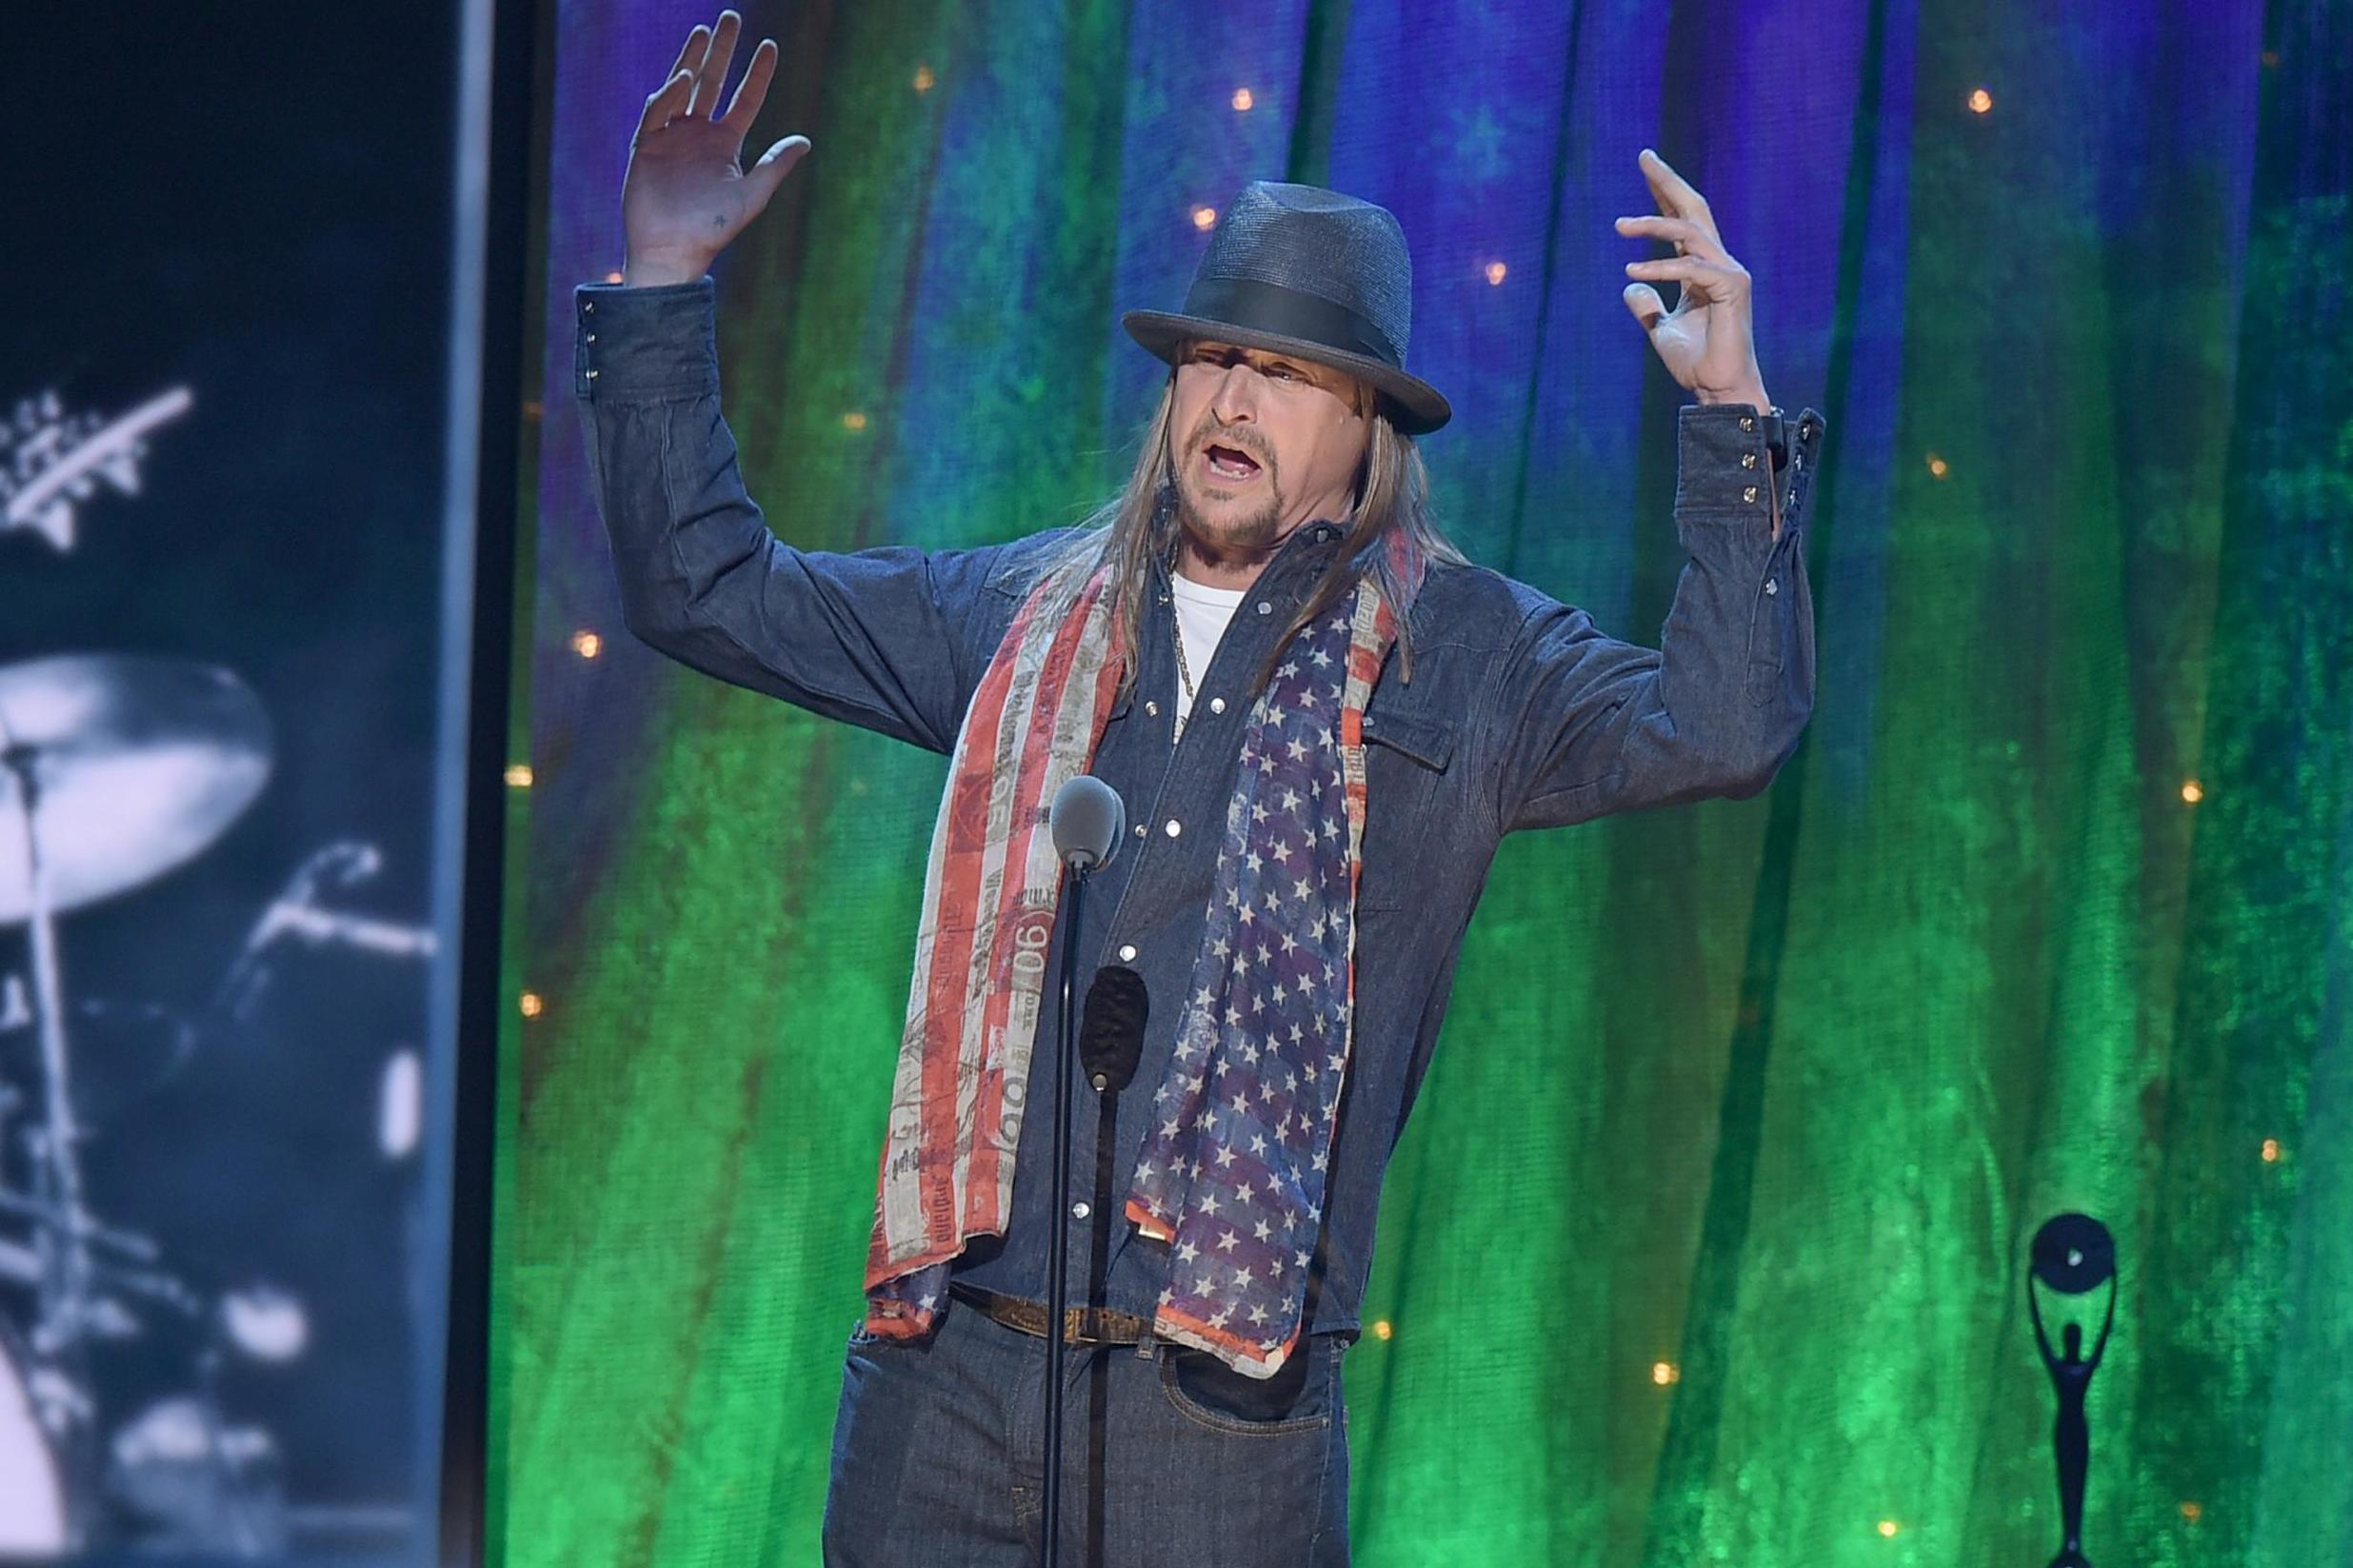 Kid Rock at the 31st annual Rock And Roll Hall Of Fame Induction Ceremony at Barclays Center on 8 April, 2016 in New York City.